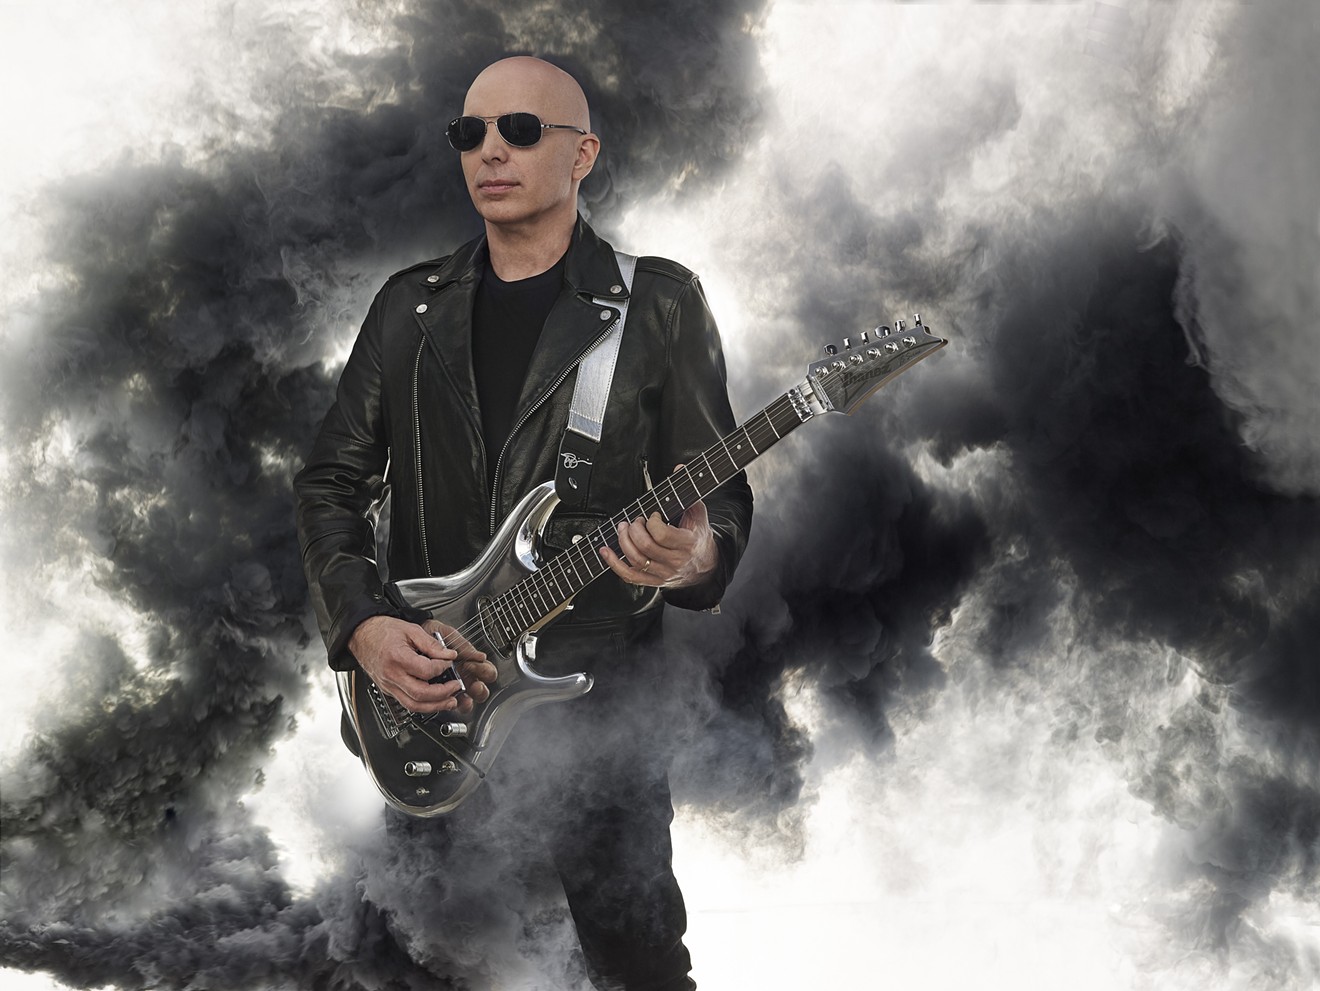 Joe Satriani will join an all-star lineup to pay tribute to Jimi Hendrix.